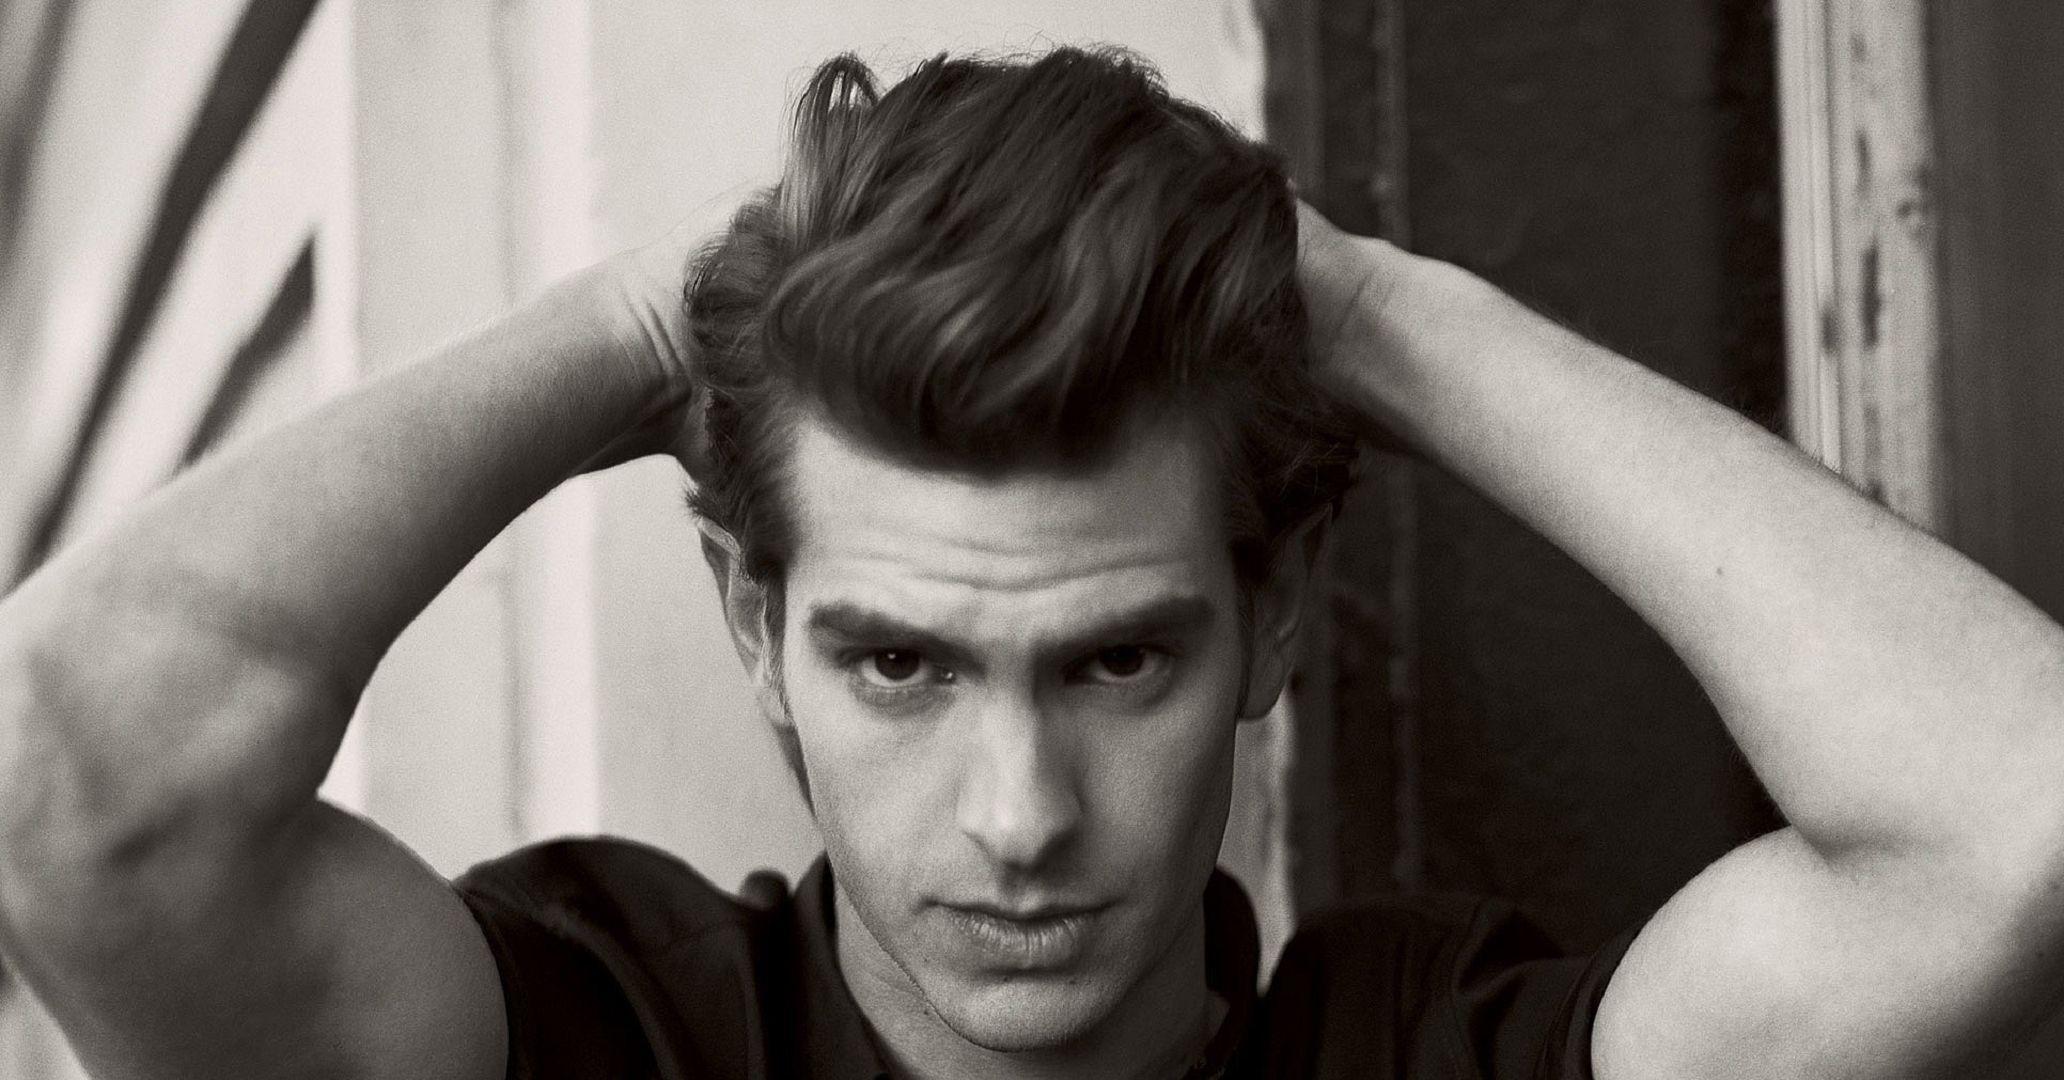 Andrew Garfield Wallpaper Image Photo Picture Background